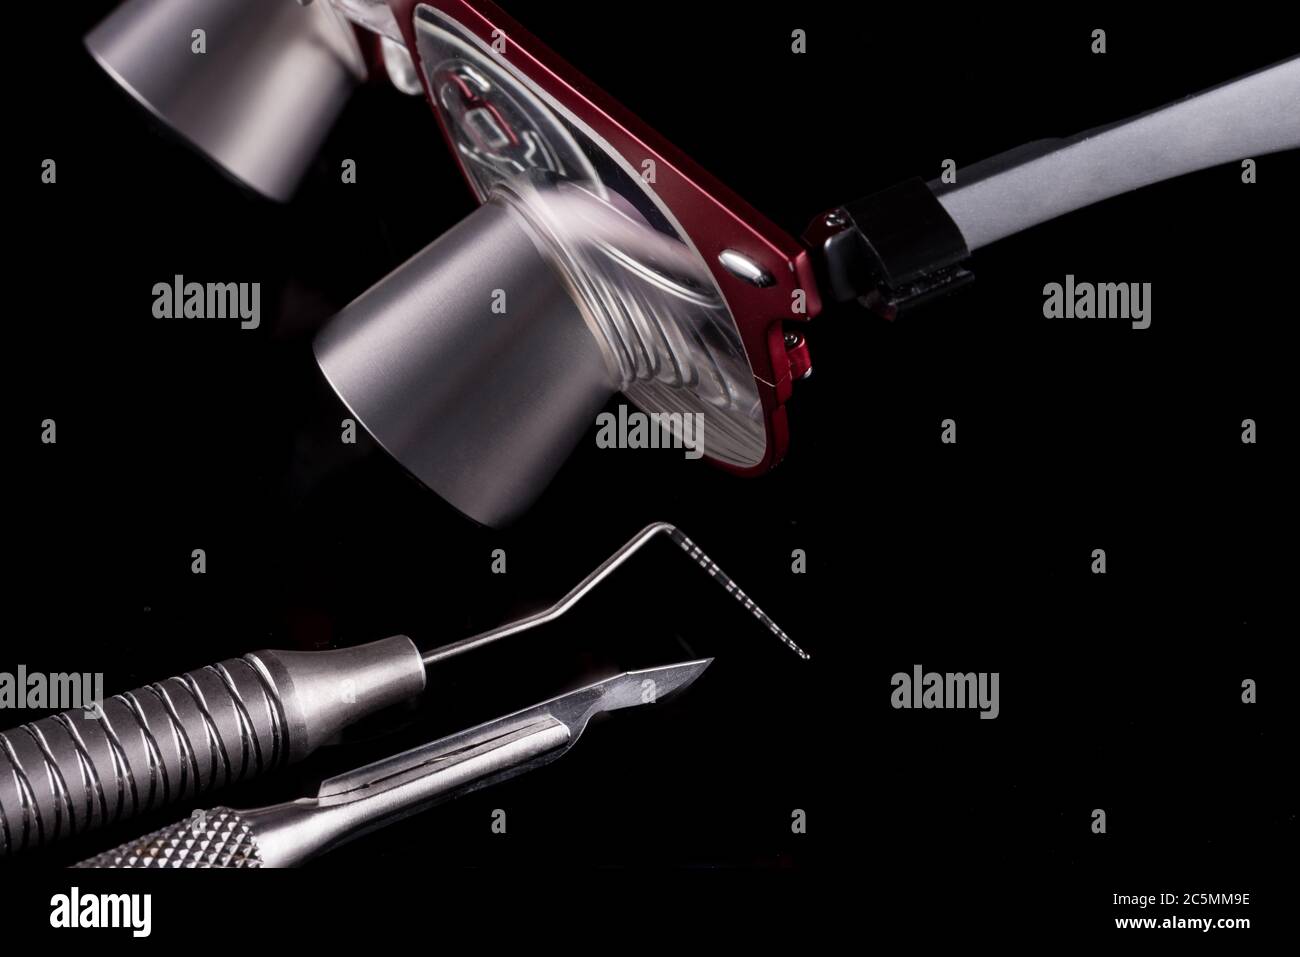 Horizontal color image with a front view of a professional dental tools on a black background Periodontal probe, scalpel and magnifying glasses. Stock Photo